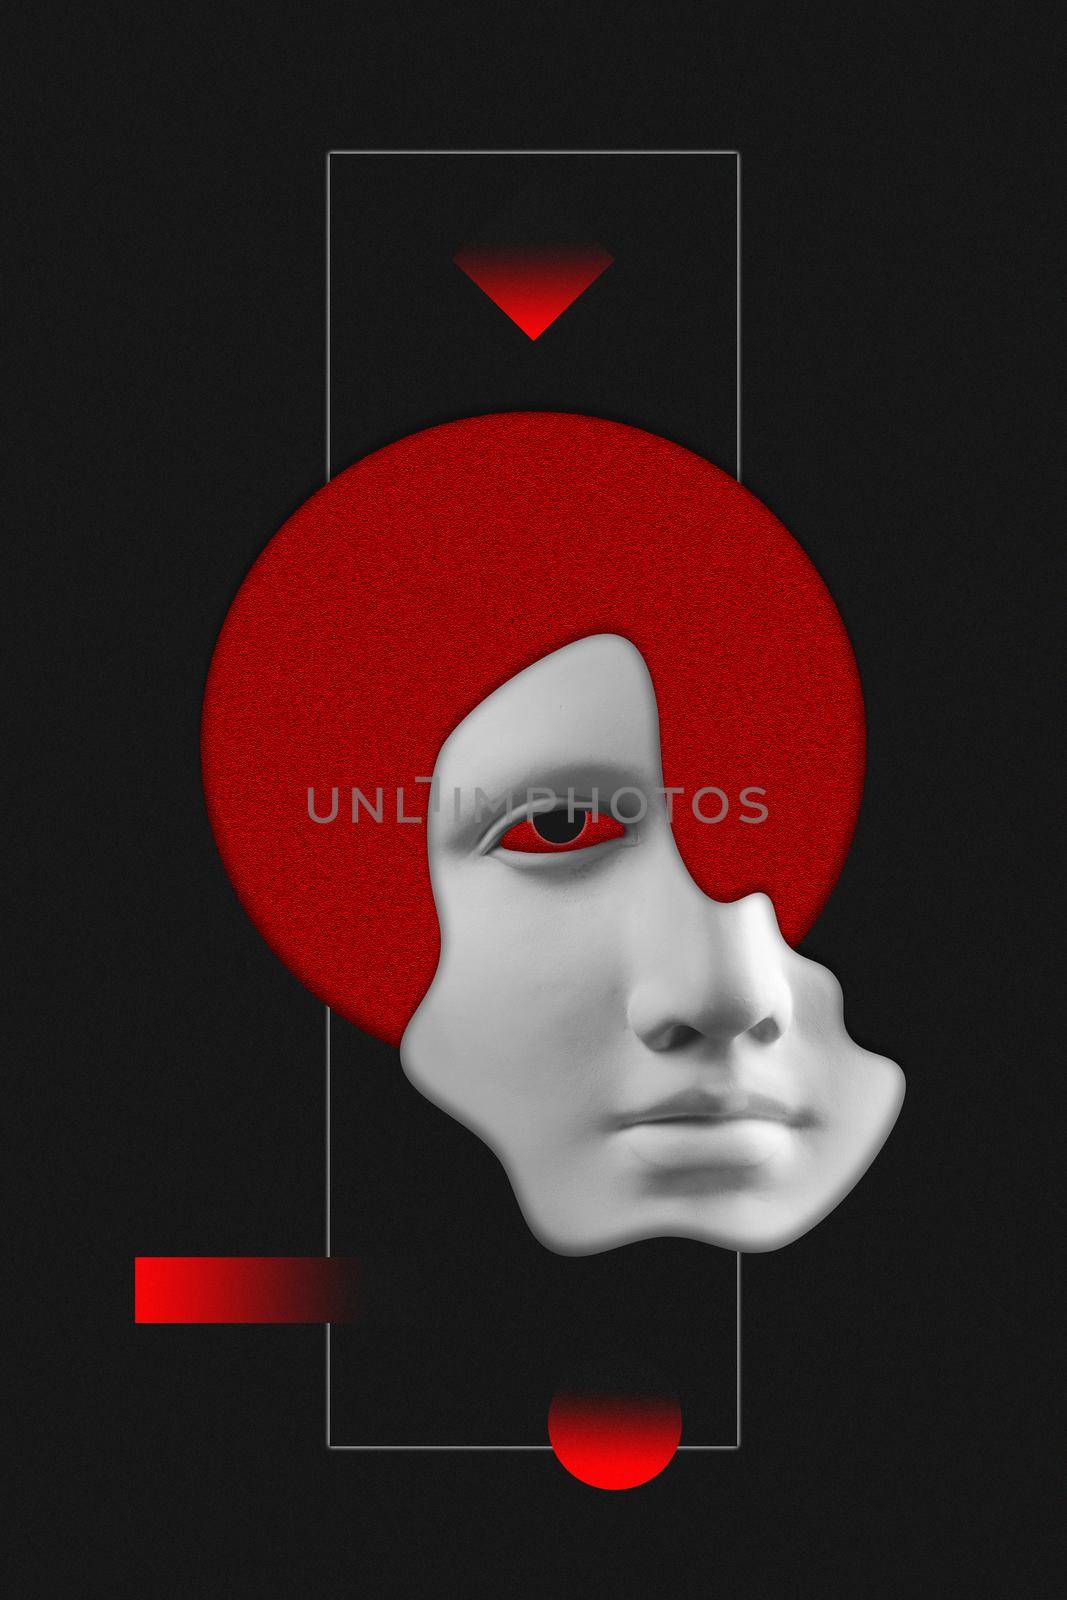 Antique sculpture of woman face surreal collage in pop art style. Modern image with cut details of statue head. Red eyes. Dark concept. Zine culture. Contemporary art poster. Funky retro minimalism. by bashta